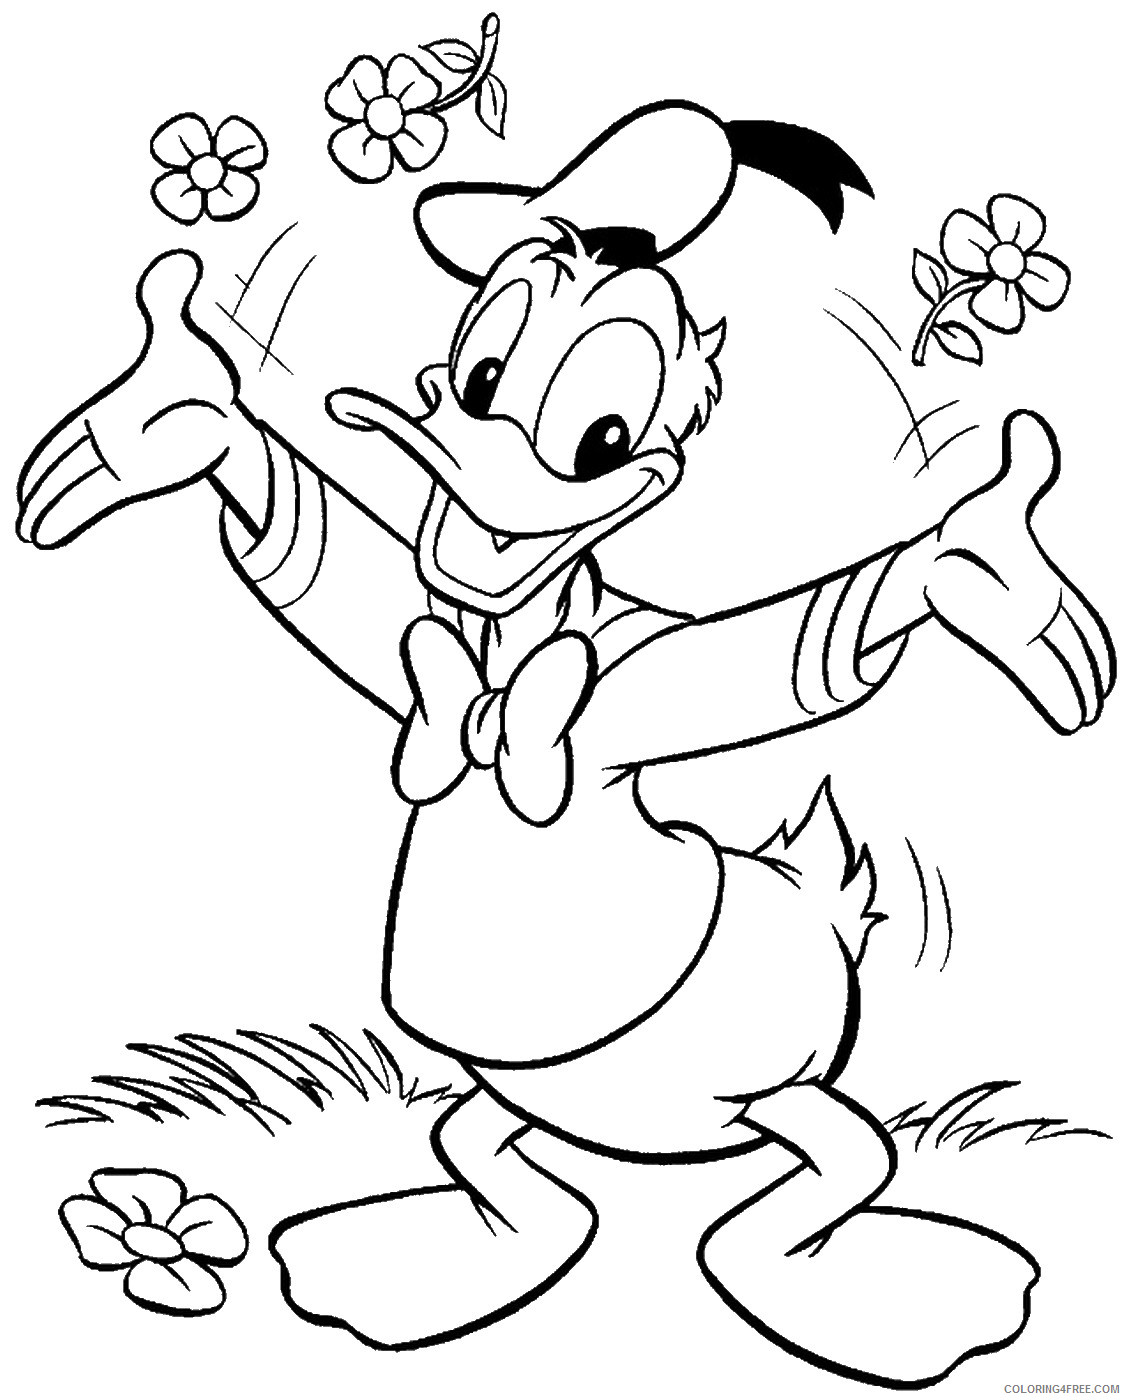 Donald Duck Coloring Pages Cartoons donald_23 Printable 2020 2516 Coloring4free